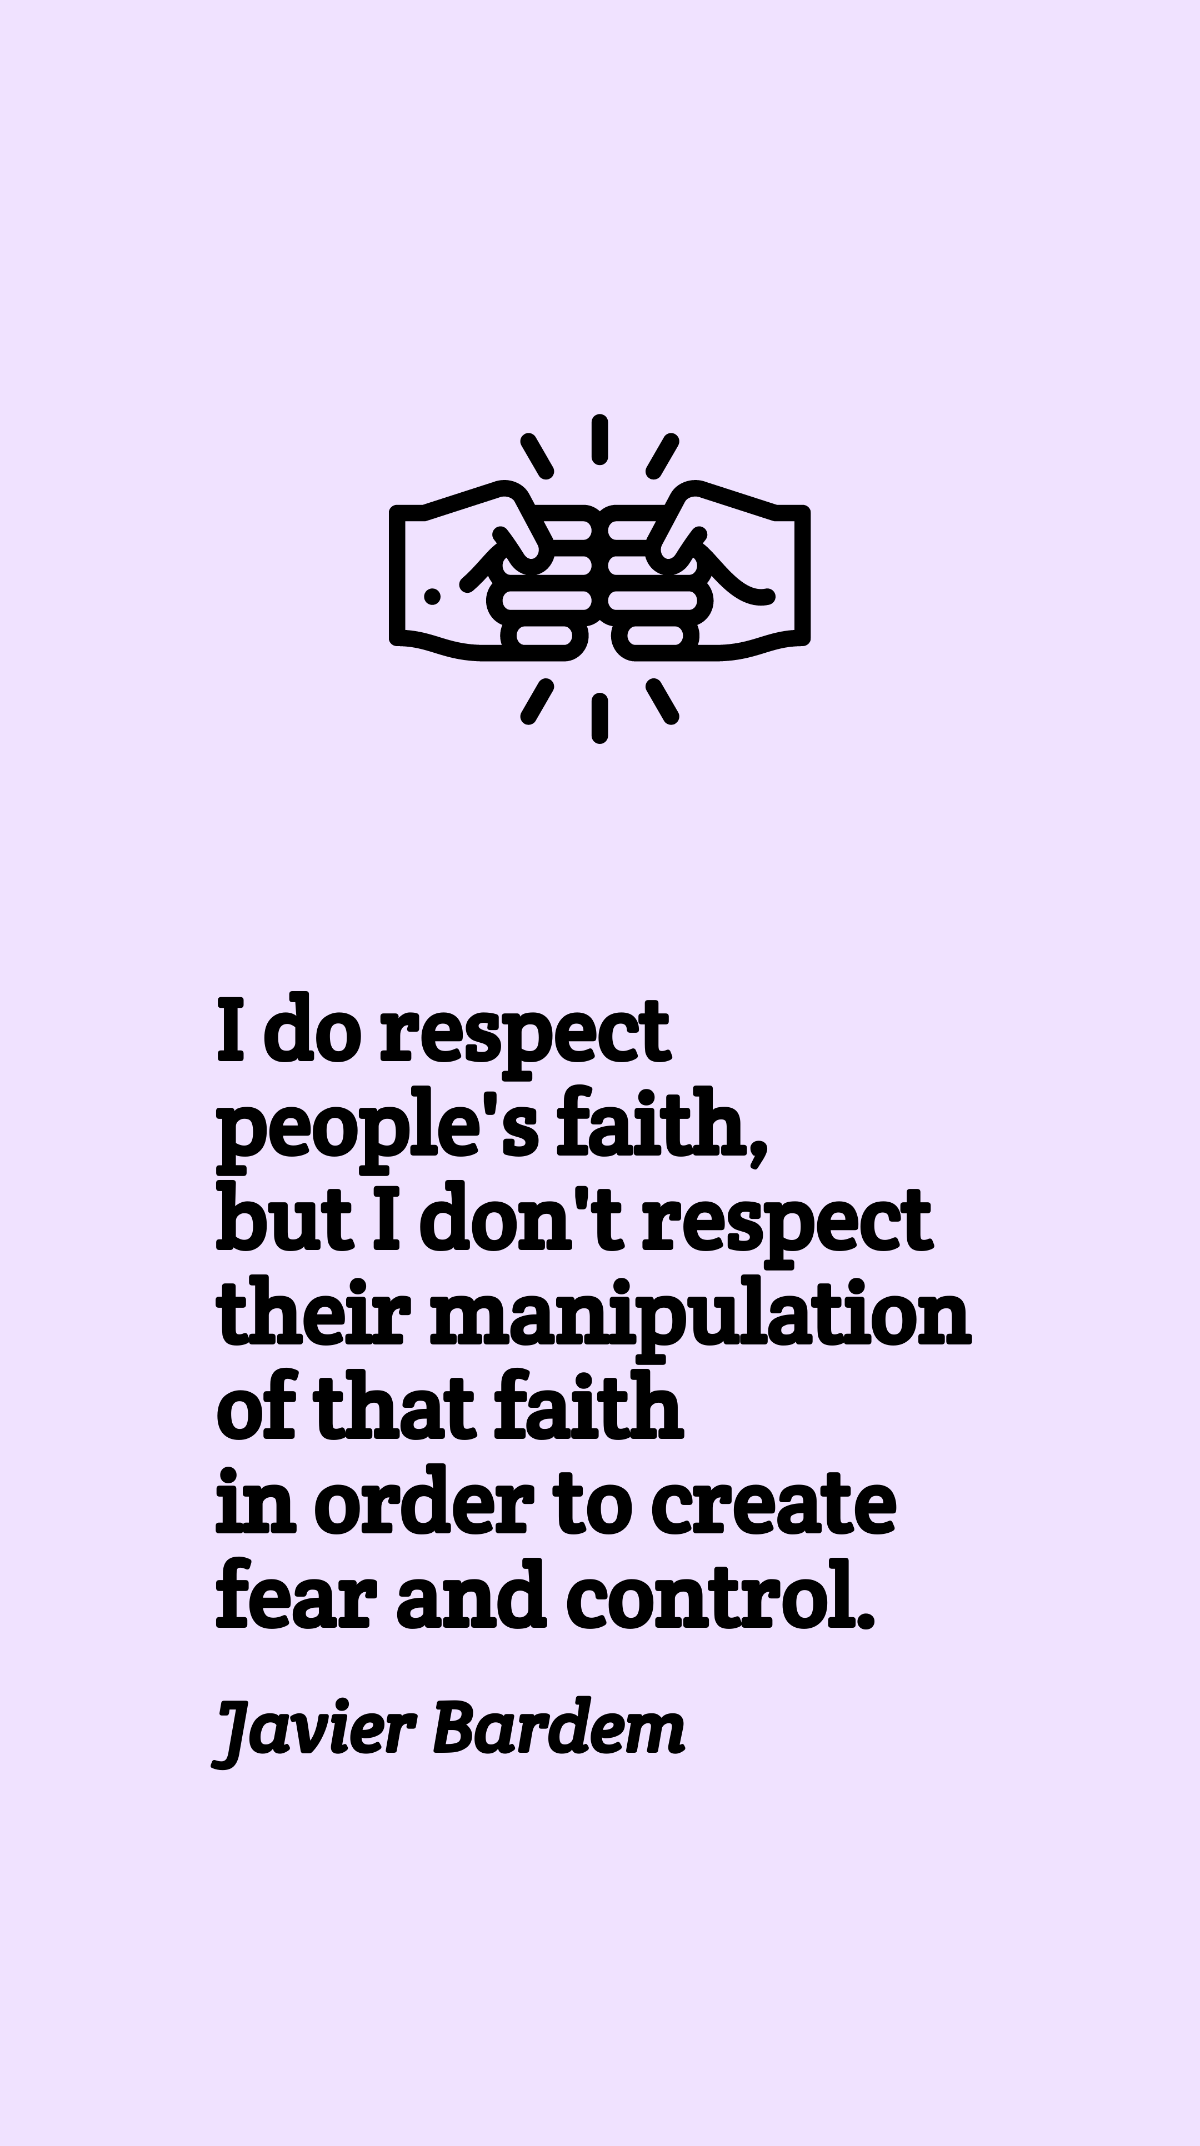 Javier Bardem - I do respect people's faith, but I don't respect their manipulation of that faith in order to create fear and control. Template